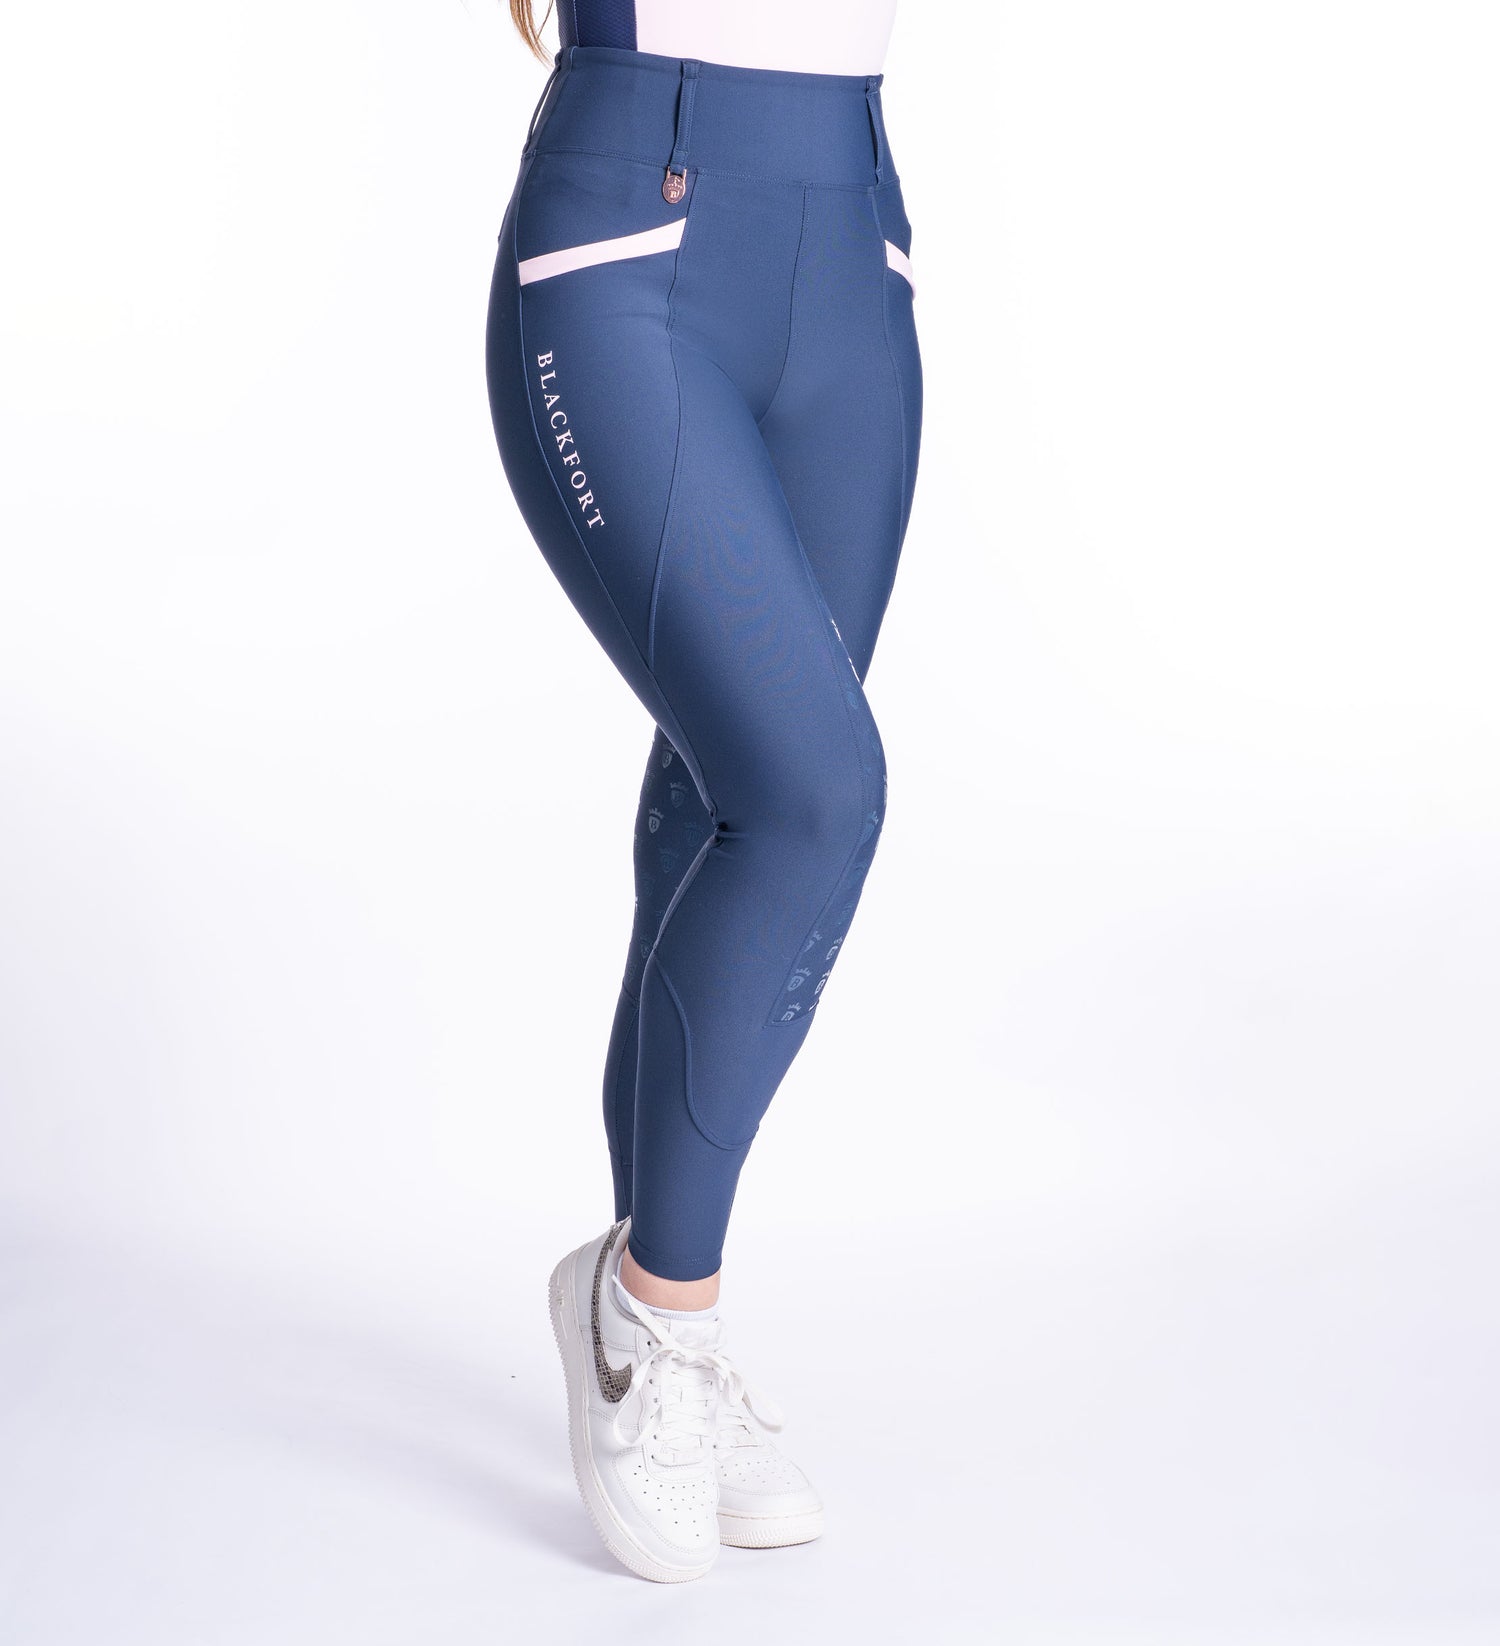 Legacy Ladies Riding Tights - Black & Candy Floss